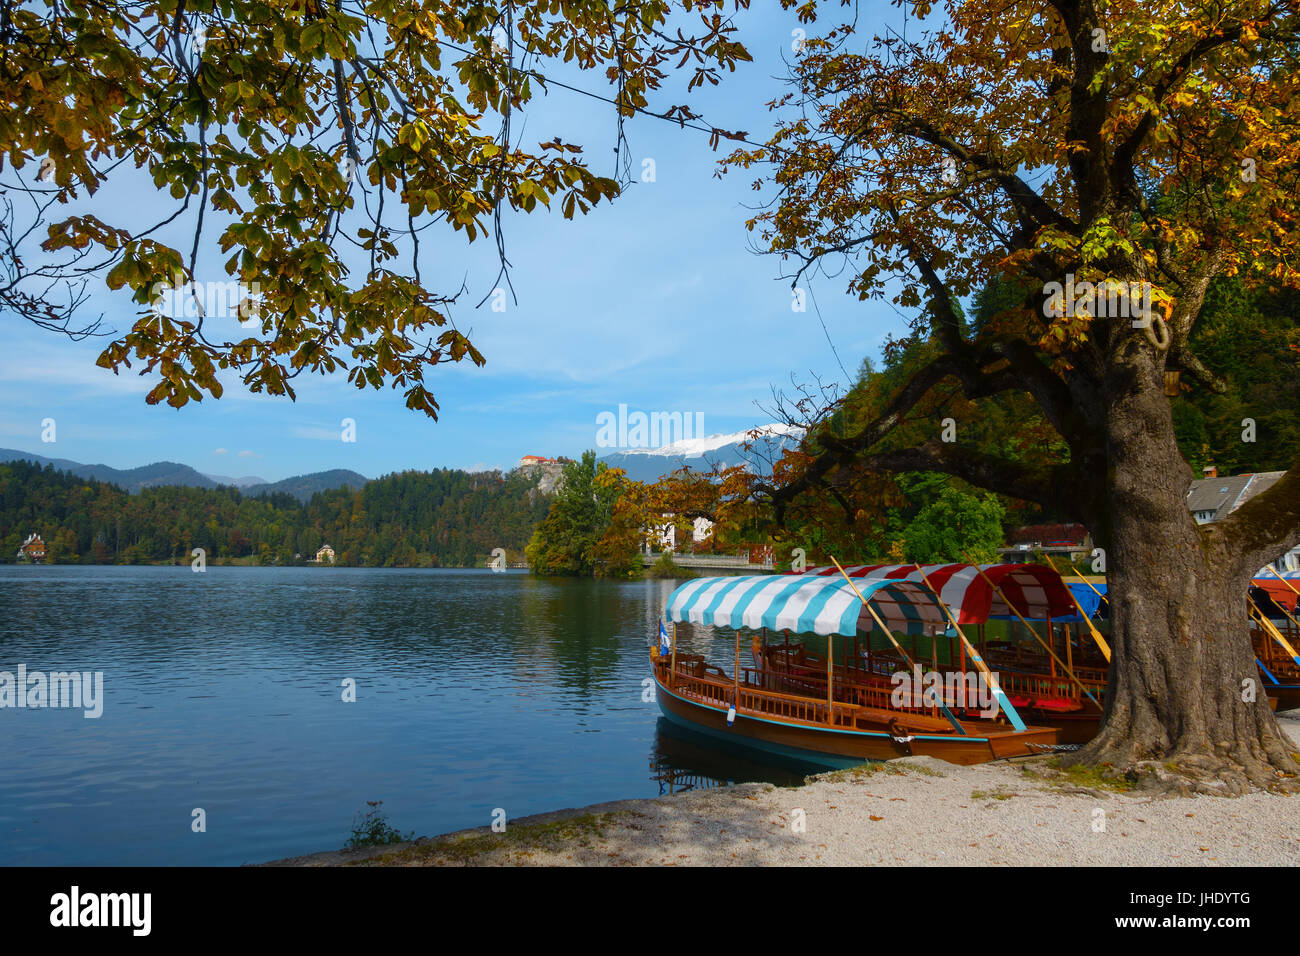 Rowboats with colorful roofs, the so-called pletna boats, in the water of Lake Bled under a chestnut tree in fall colors in autumn, Slovenia. Stock Photo